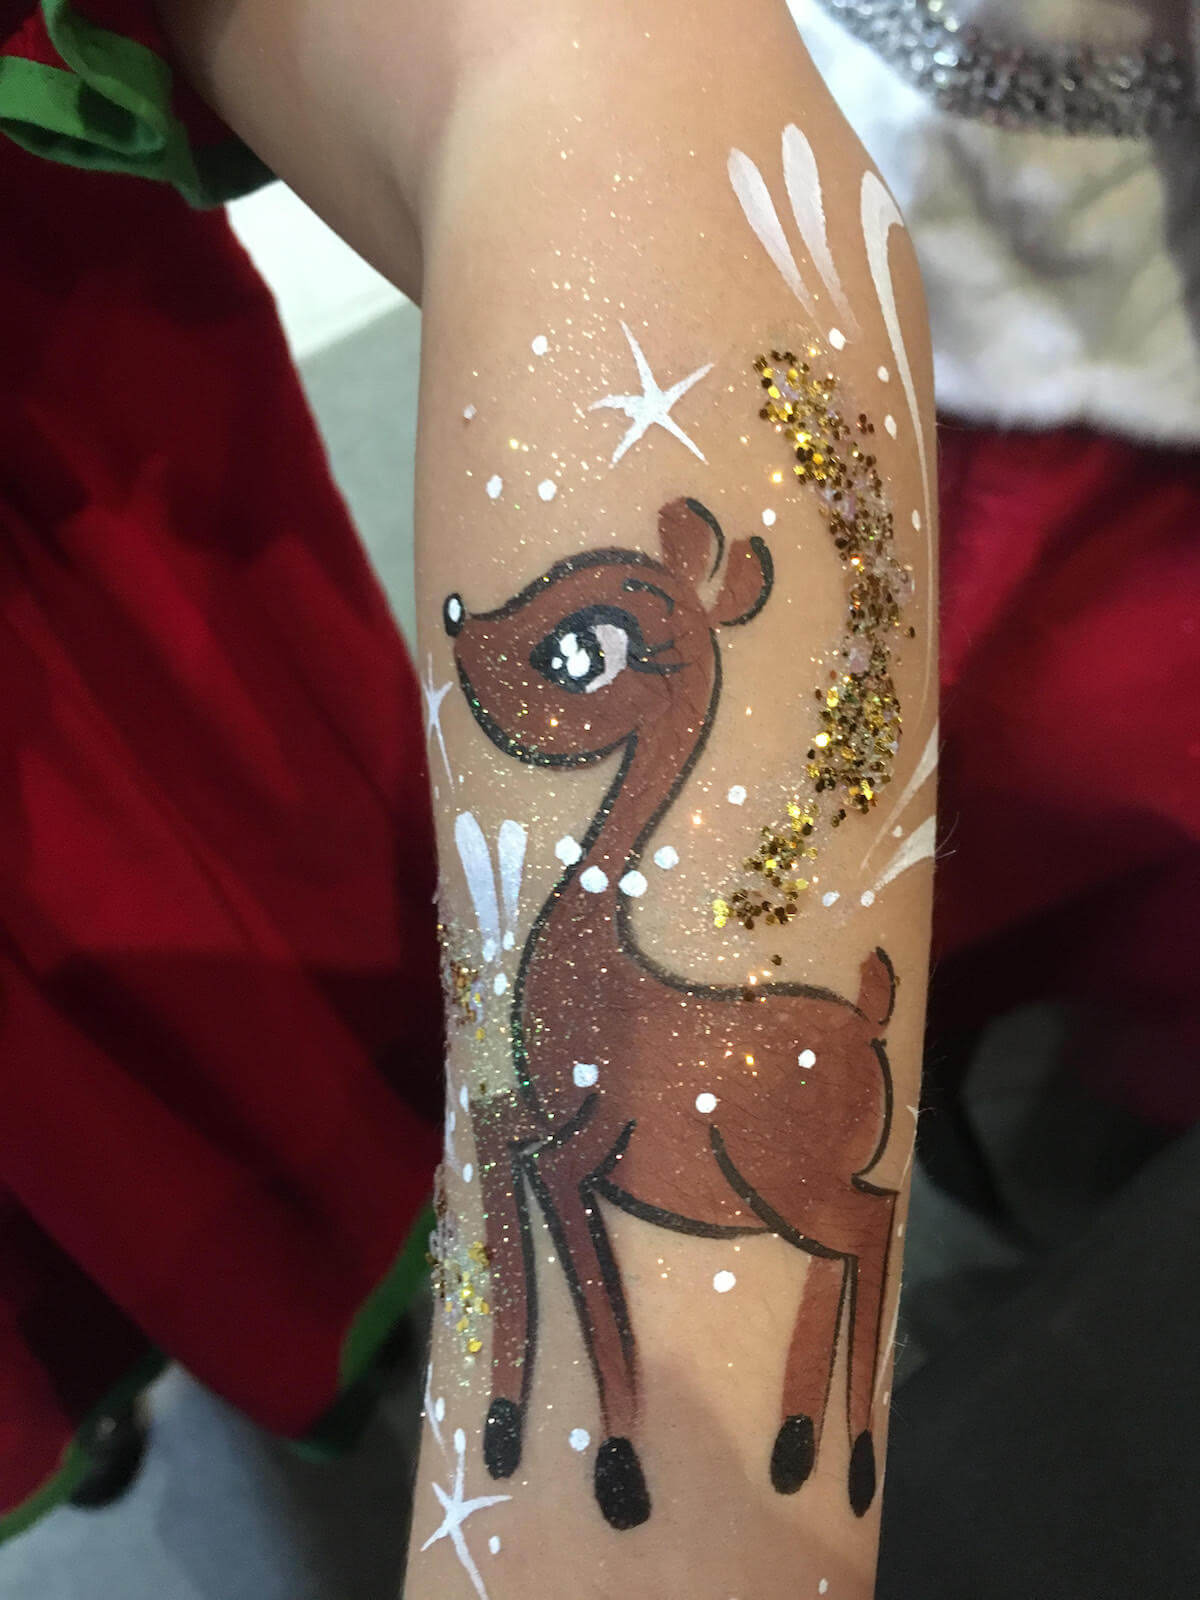 One guest had a reindeer painted on her arm.